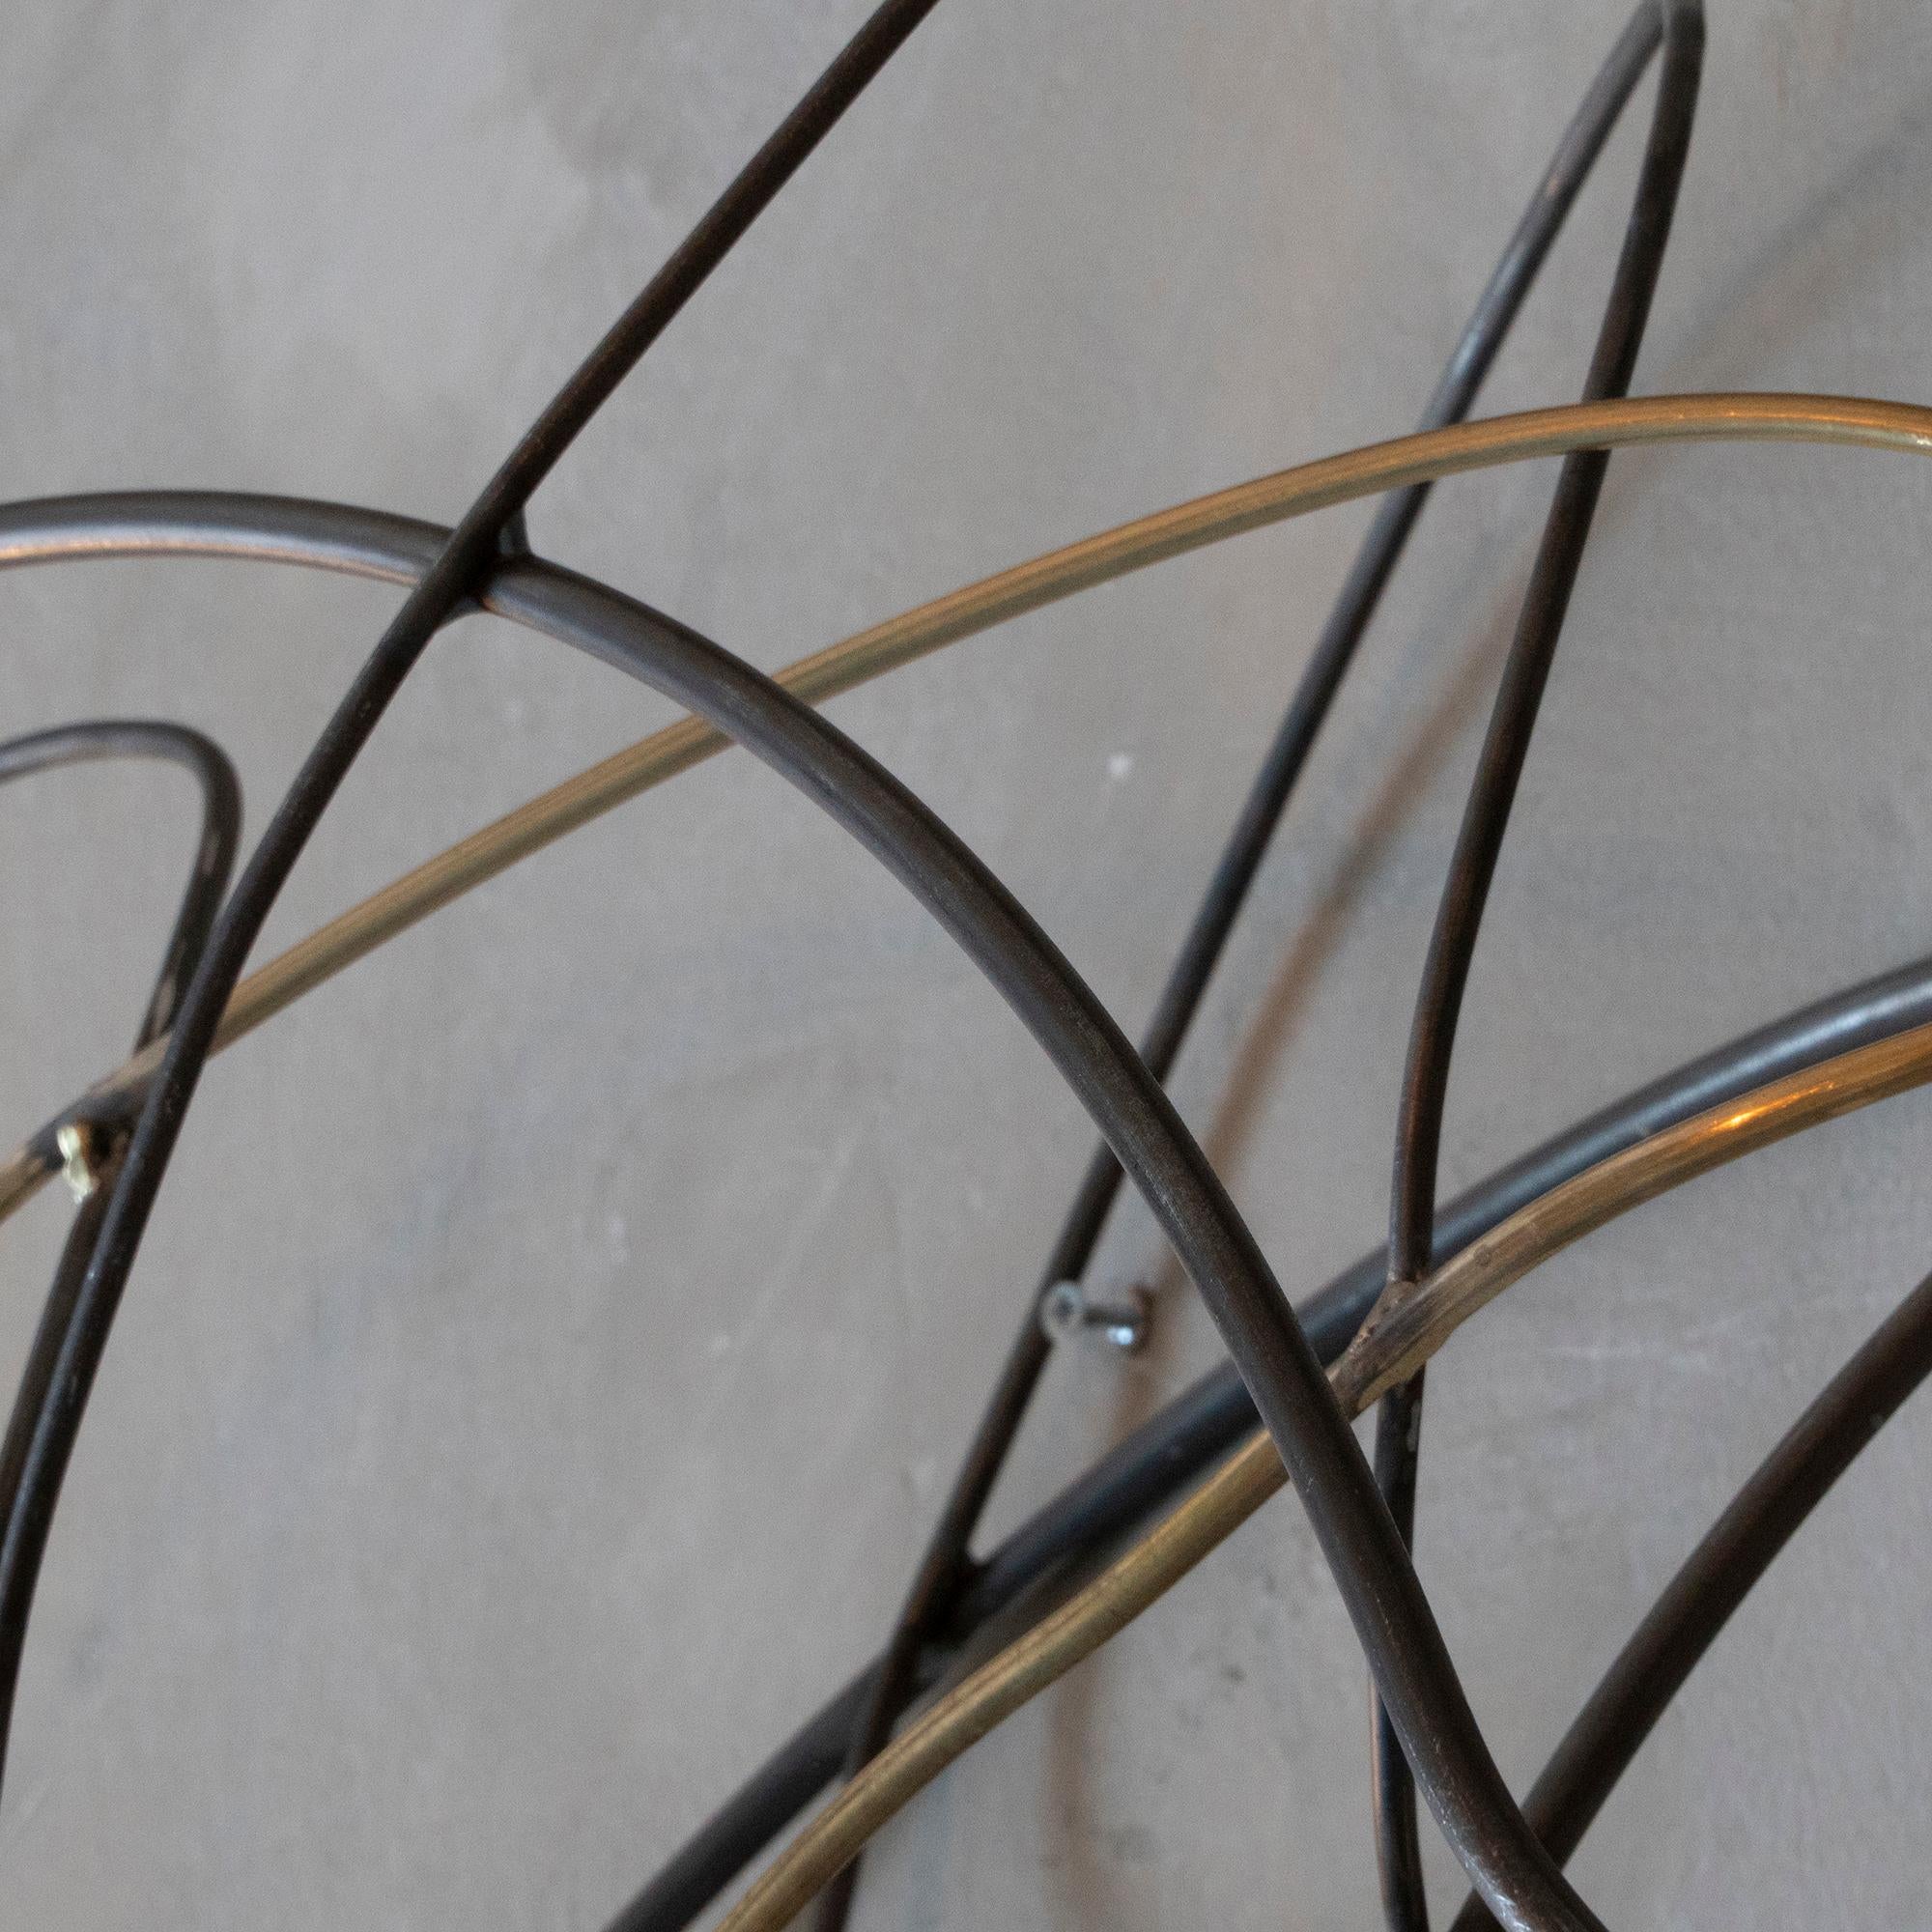 Contemporary Marco Croce Steel and Brass Abstract Wall Sculpture, Italy, 2018